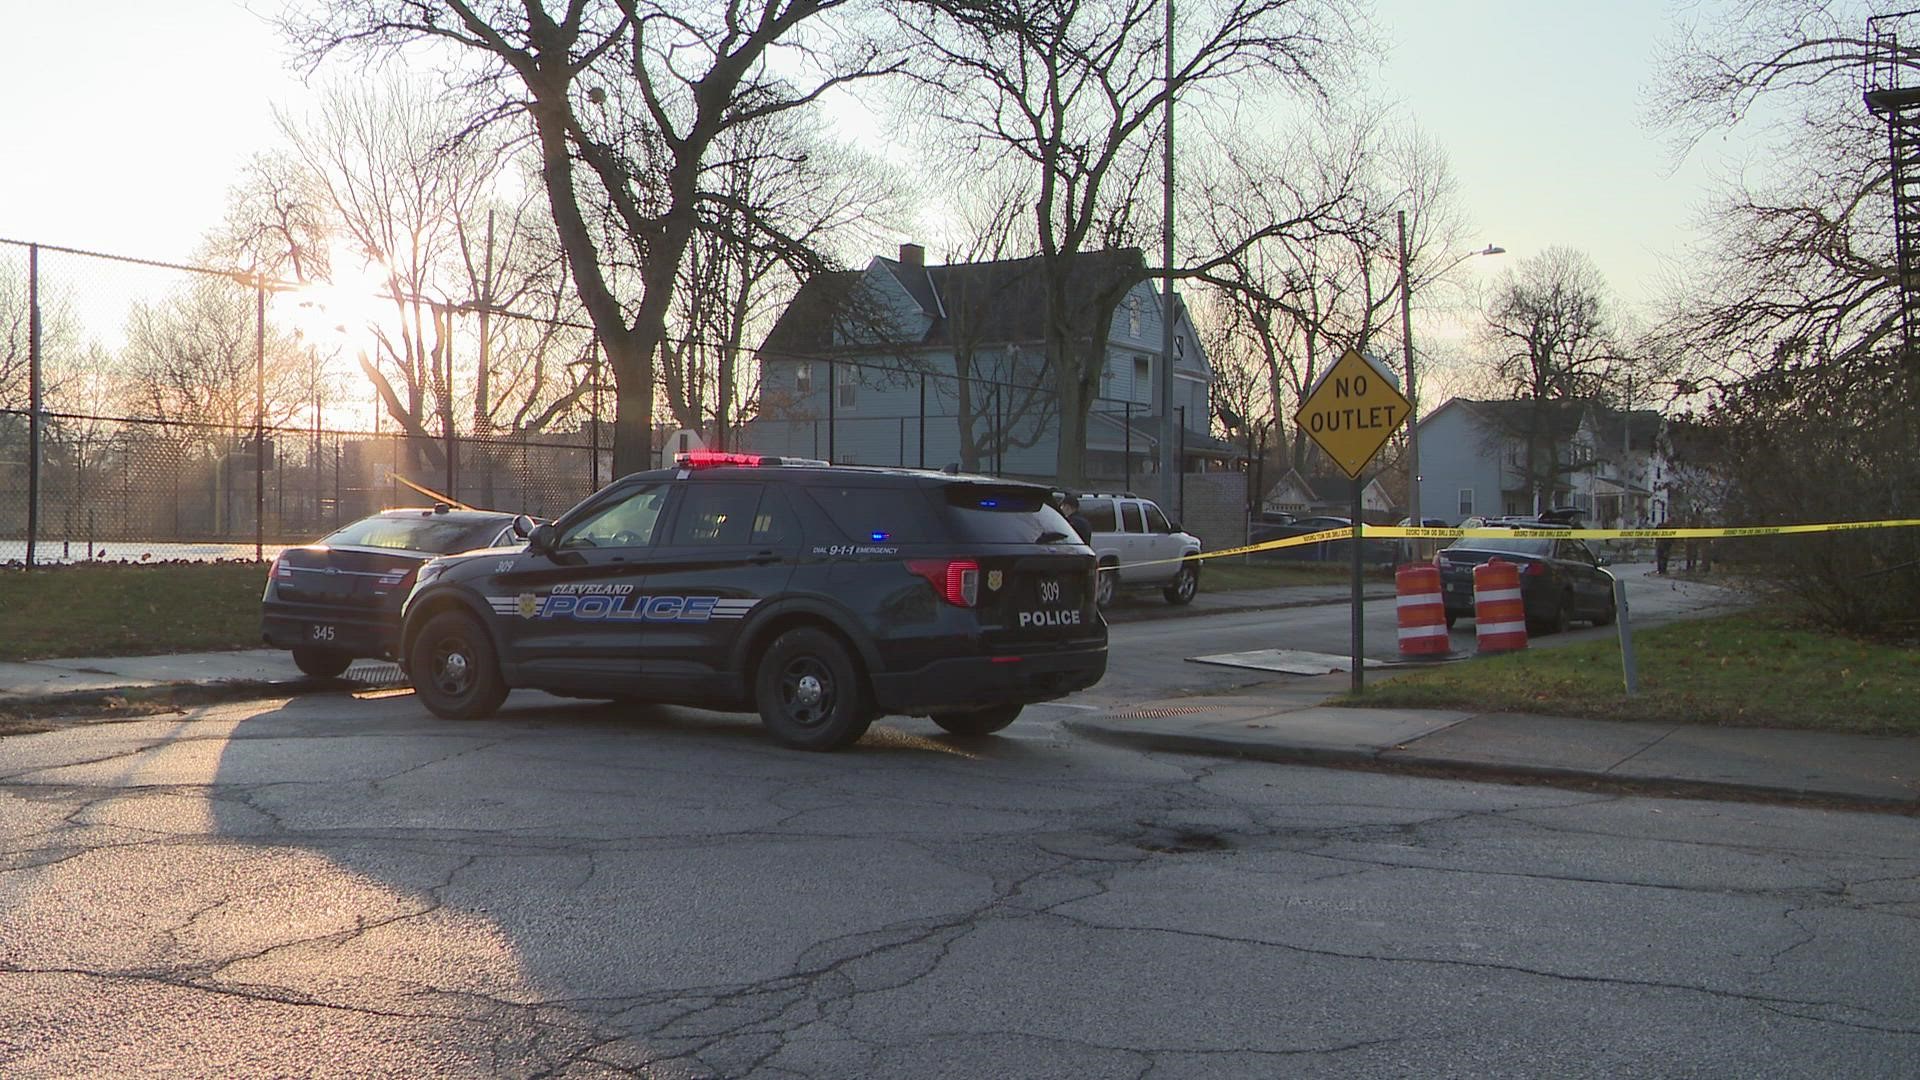 The incident happened on East 85th street in Cleveland.